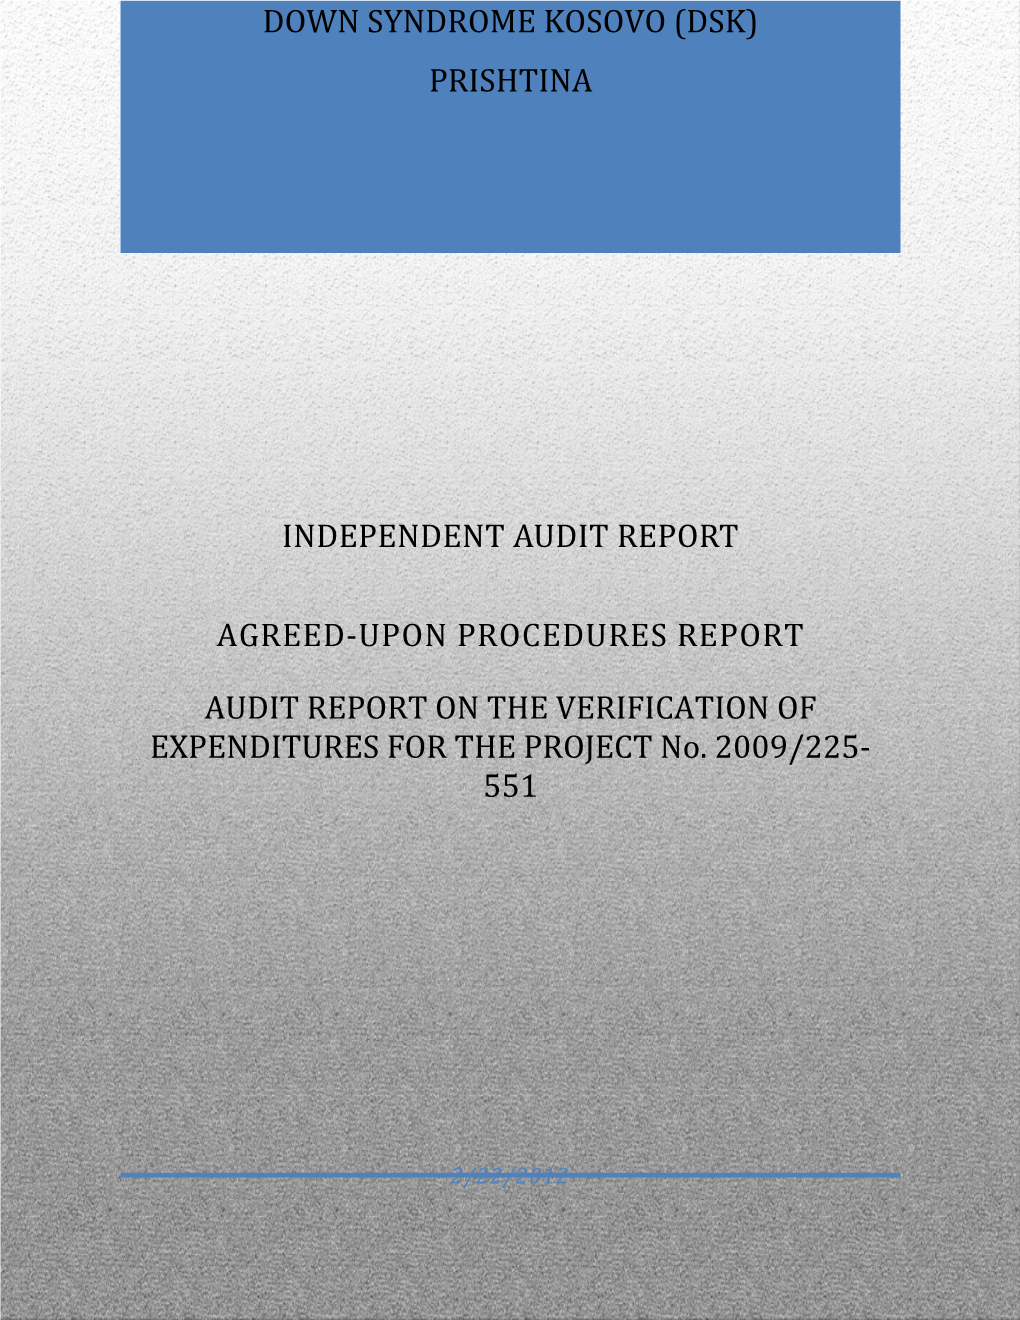 Audit Report on the Verification of Expenditures for the Project No. 2009/225-551